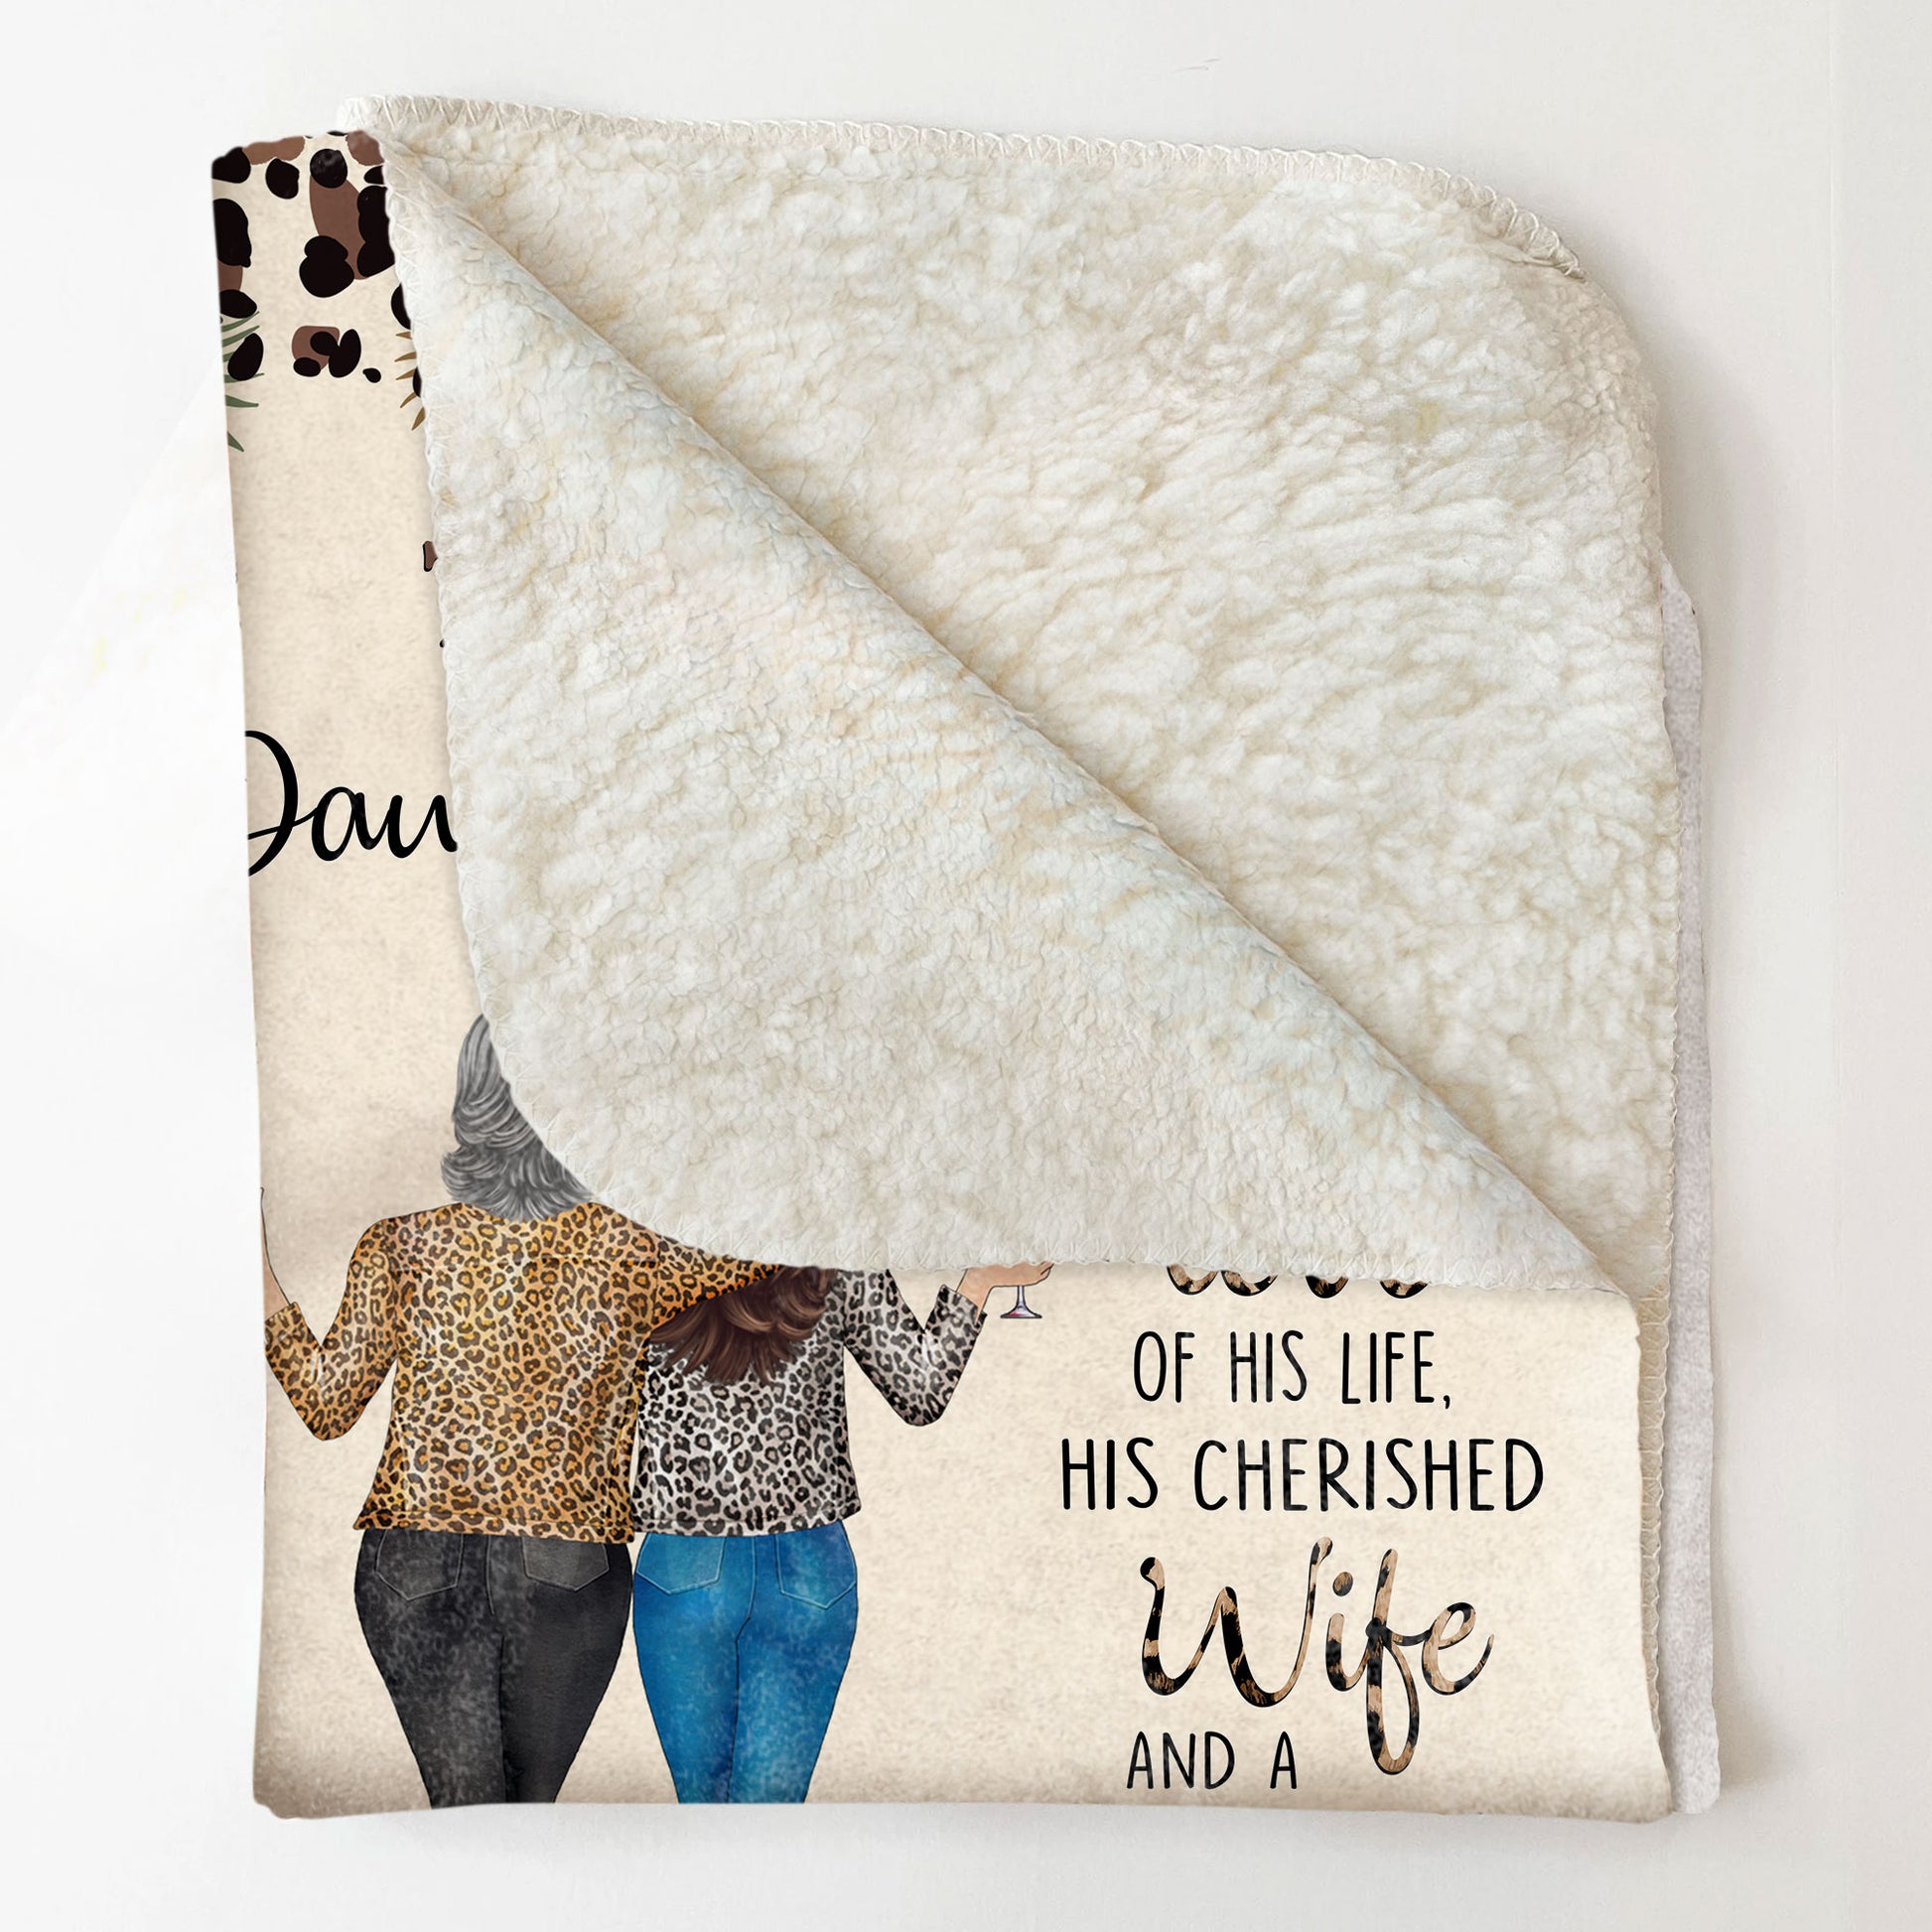 To My Daughter-In-Law You Are My Daughter-In-Heart - Personalized Blanket